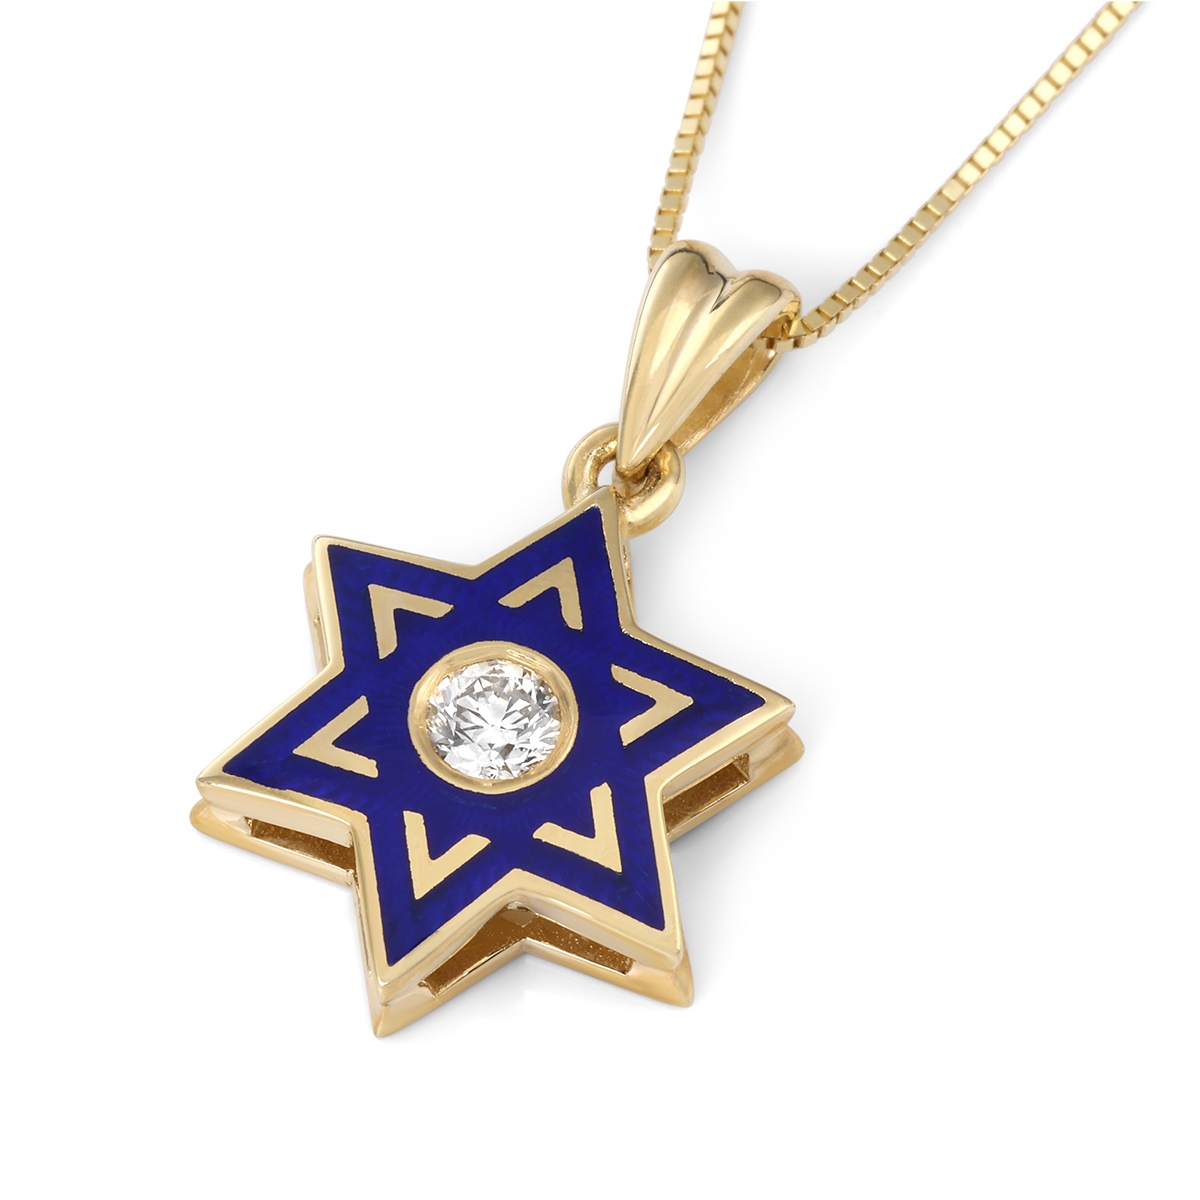 Deluxe 14K Yellow Gold & Blue Enamel Star of David Children's Pendant Necklace With White Diamond  - 1